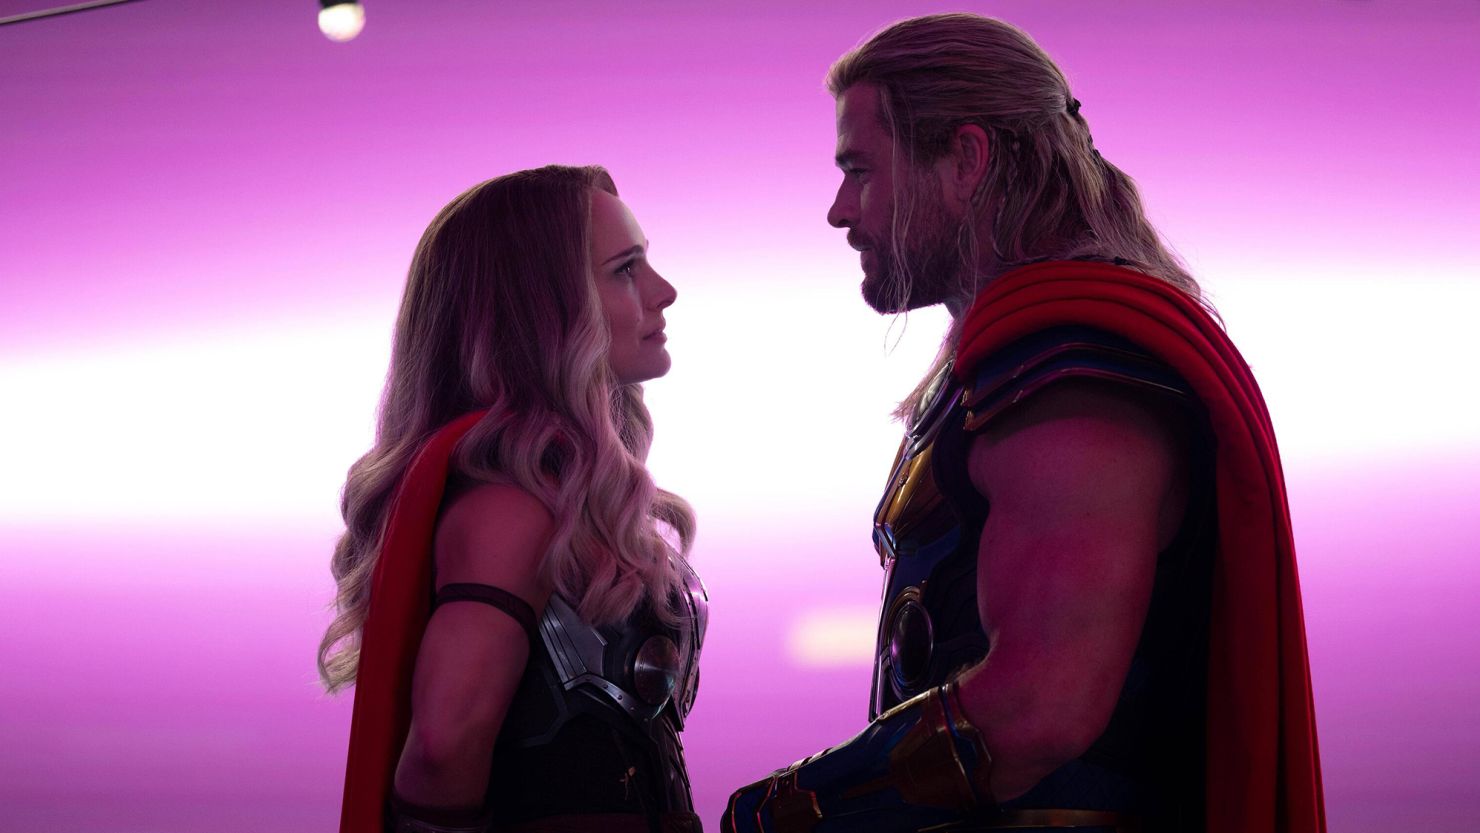 Cool thing I noticed in Thor: Love and Thunder trailer : r